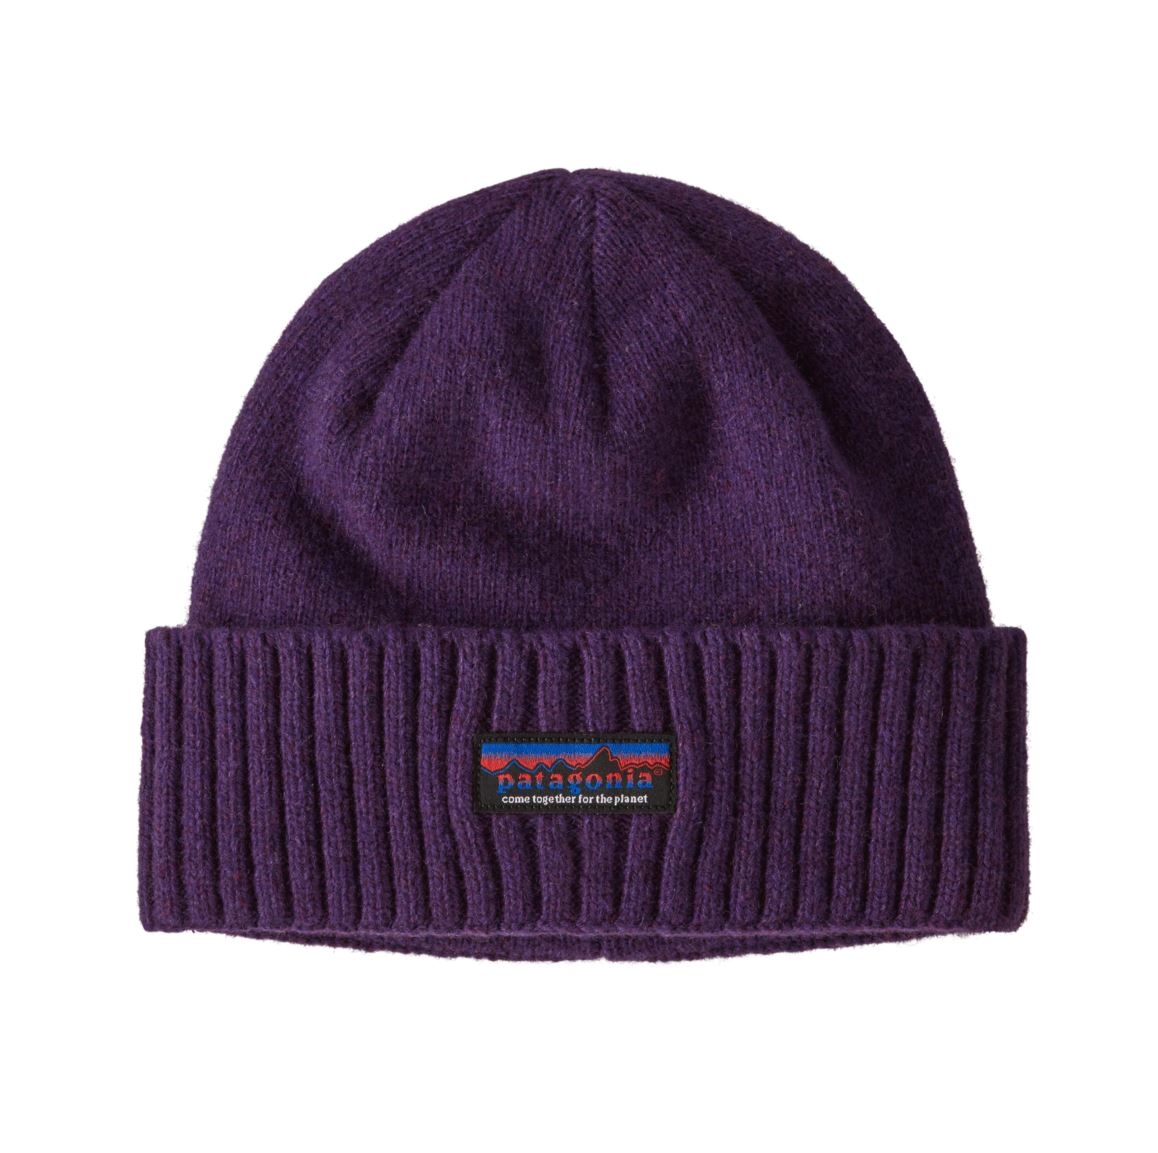 Patagonia Brodeo Beanie TPLP-0